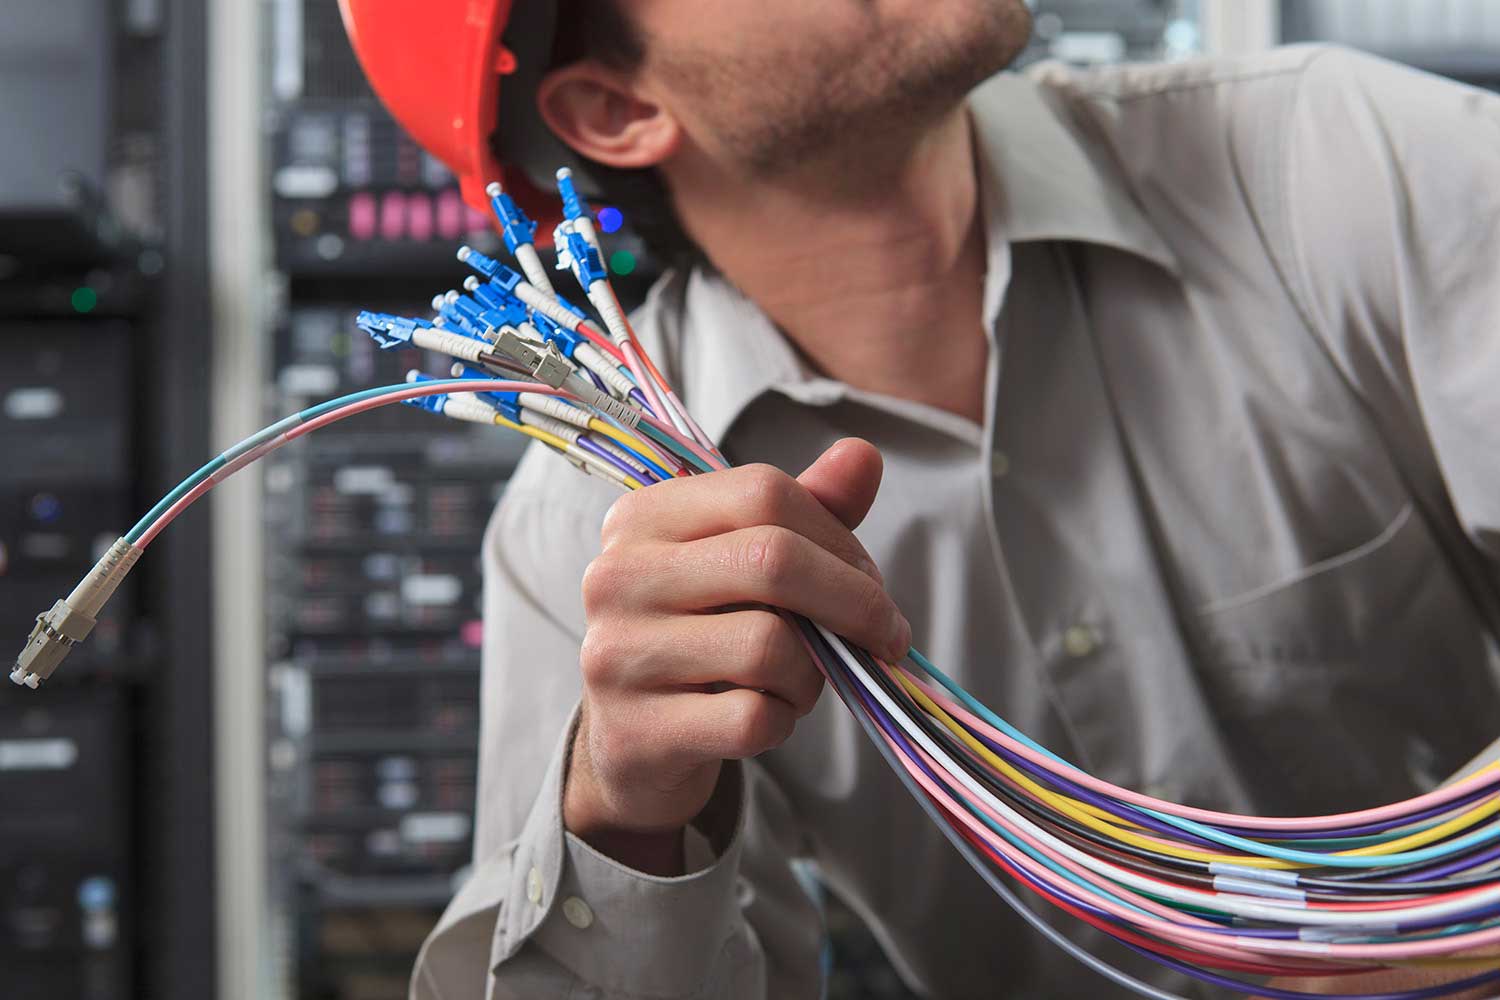 Safety rules for working with fiber optic cables